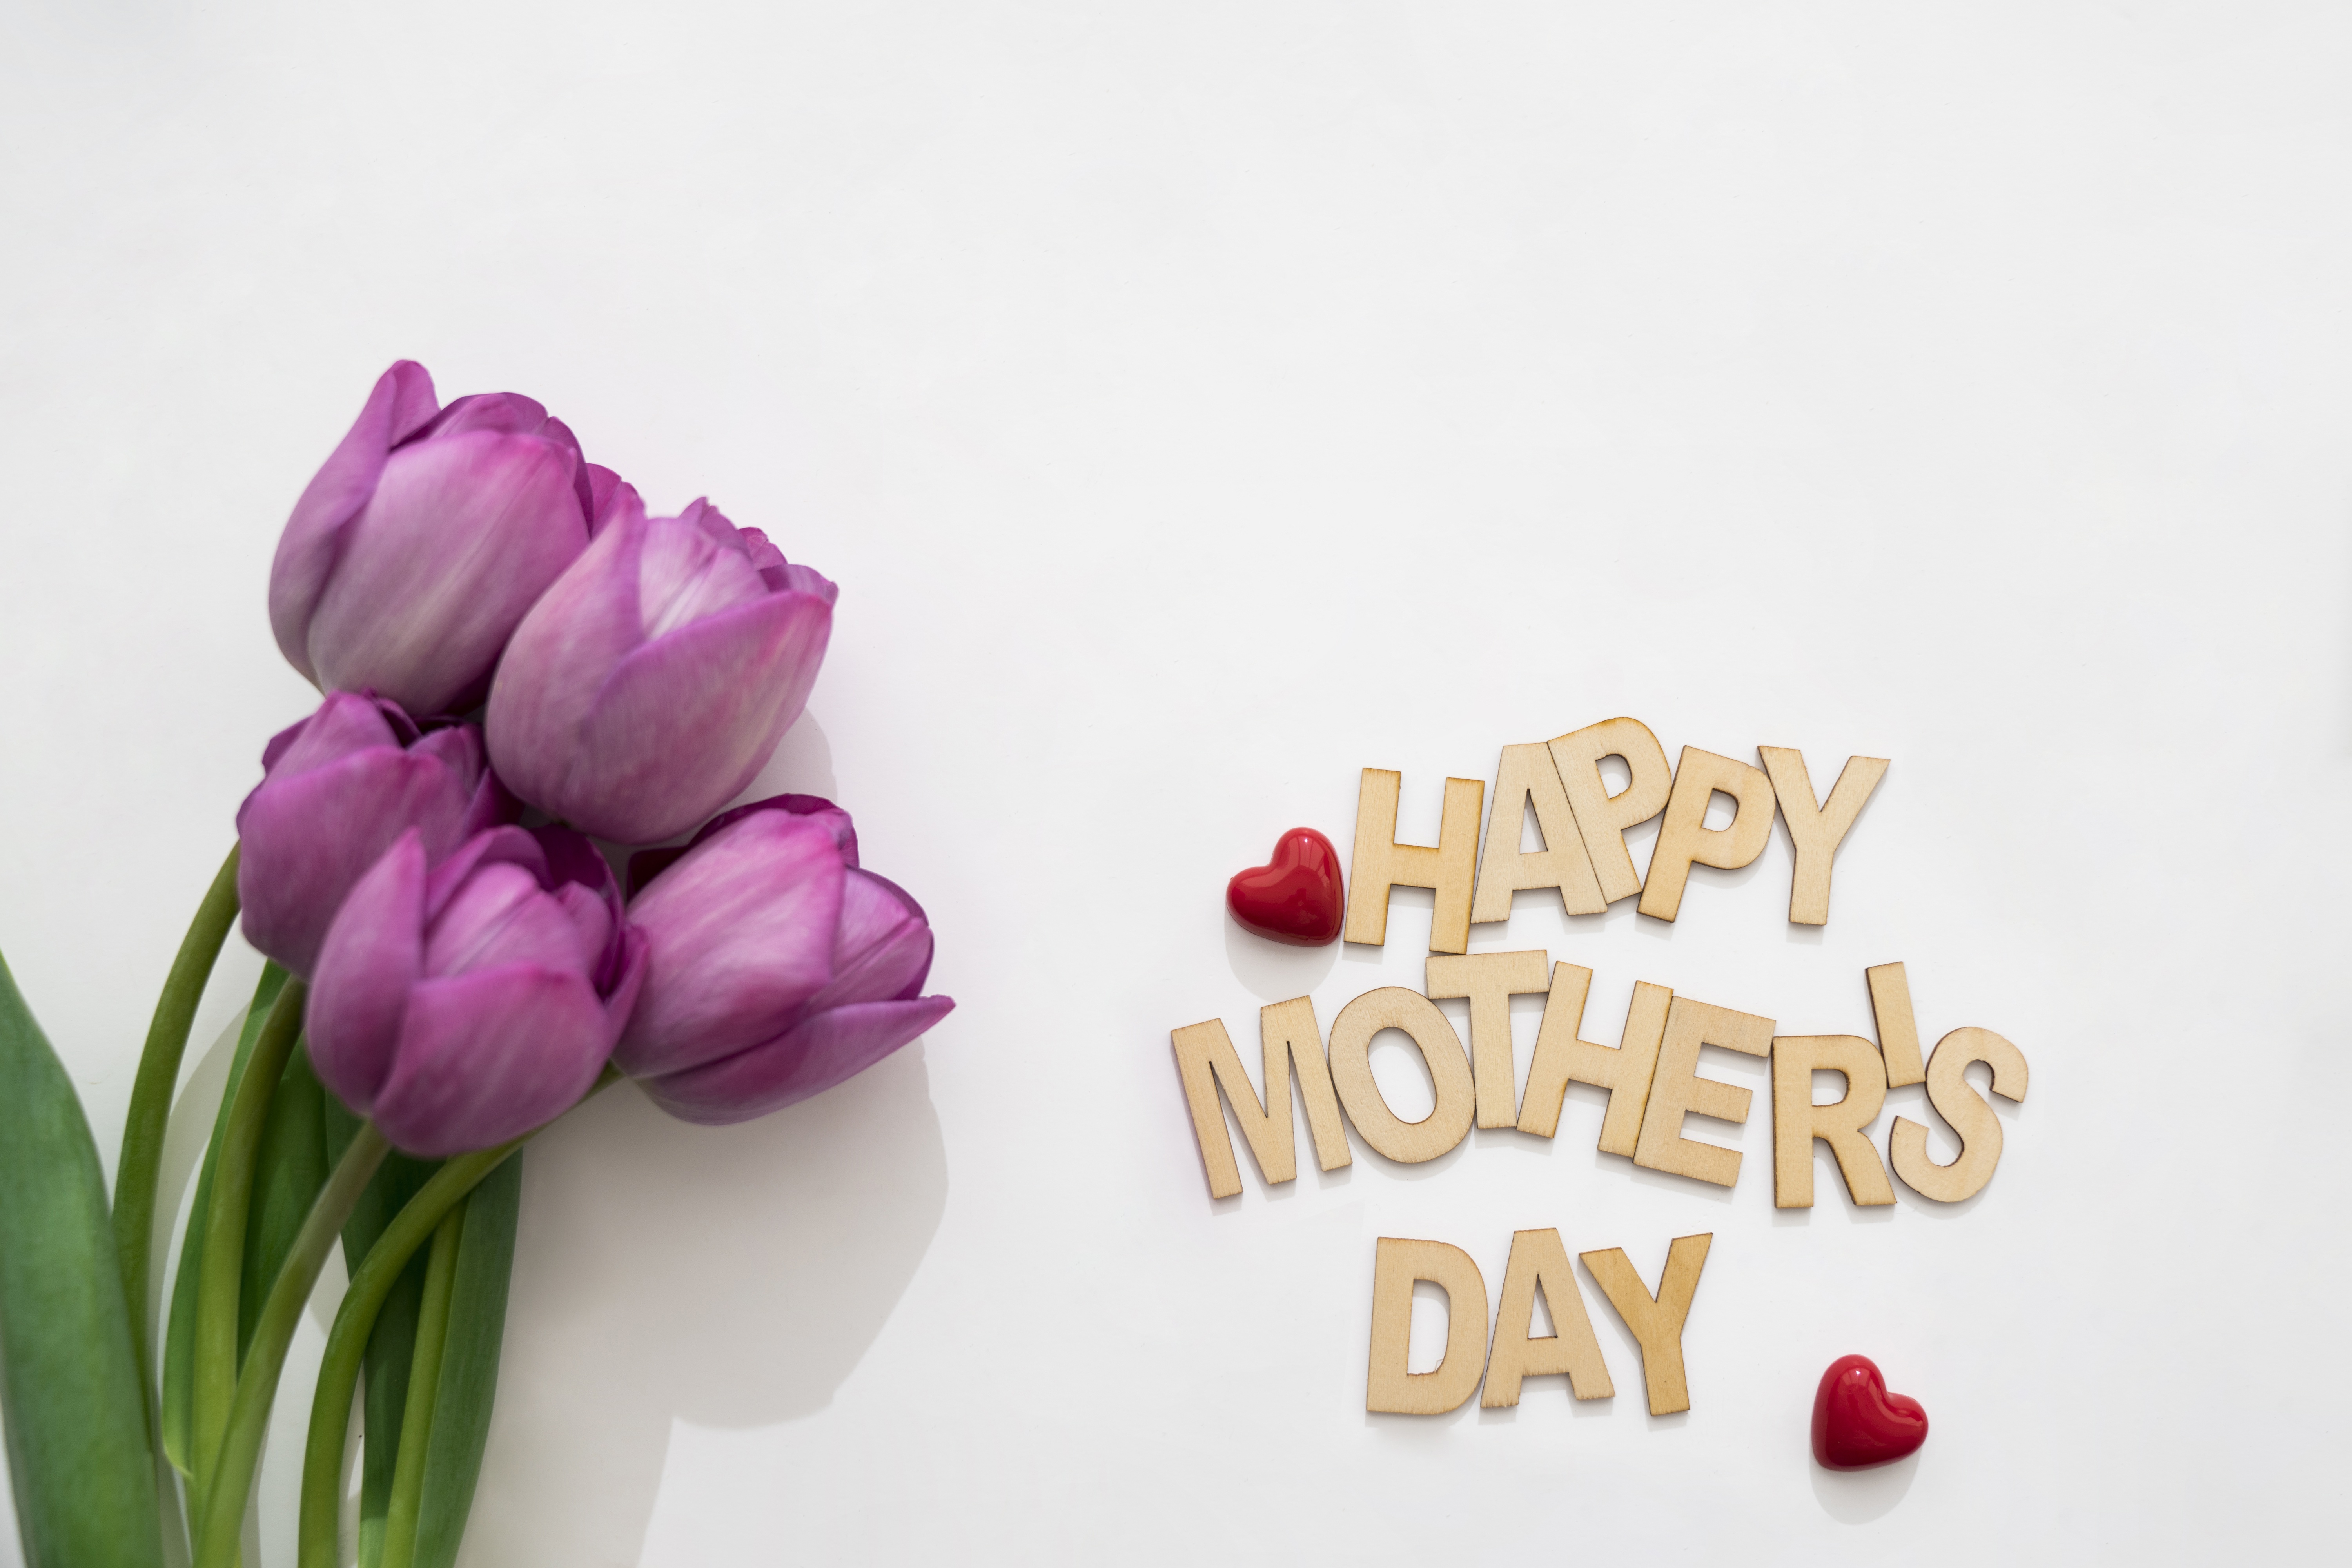 holiday, mother's day, flower, pink flower, tulip